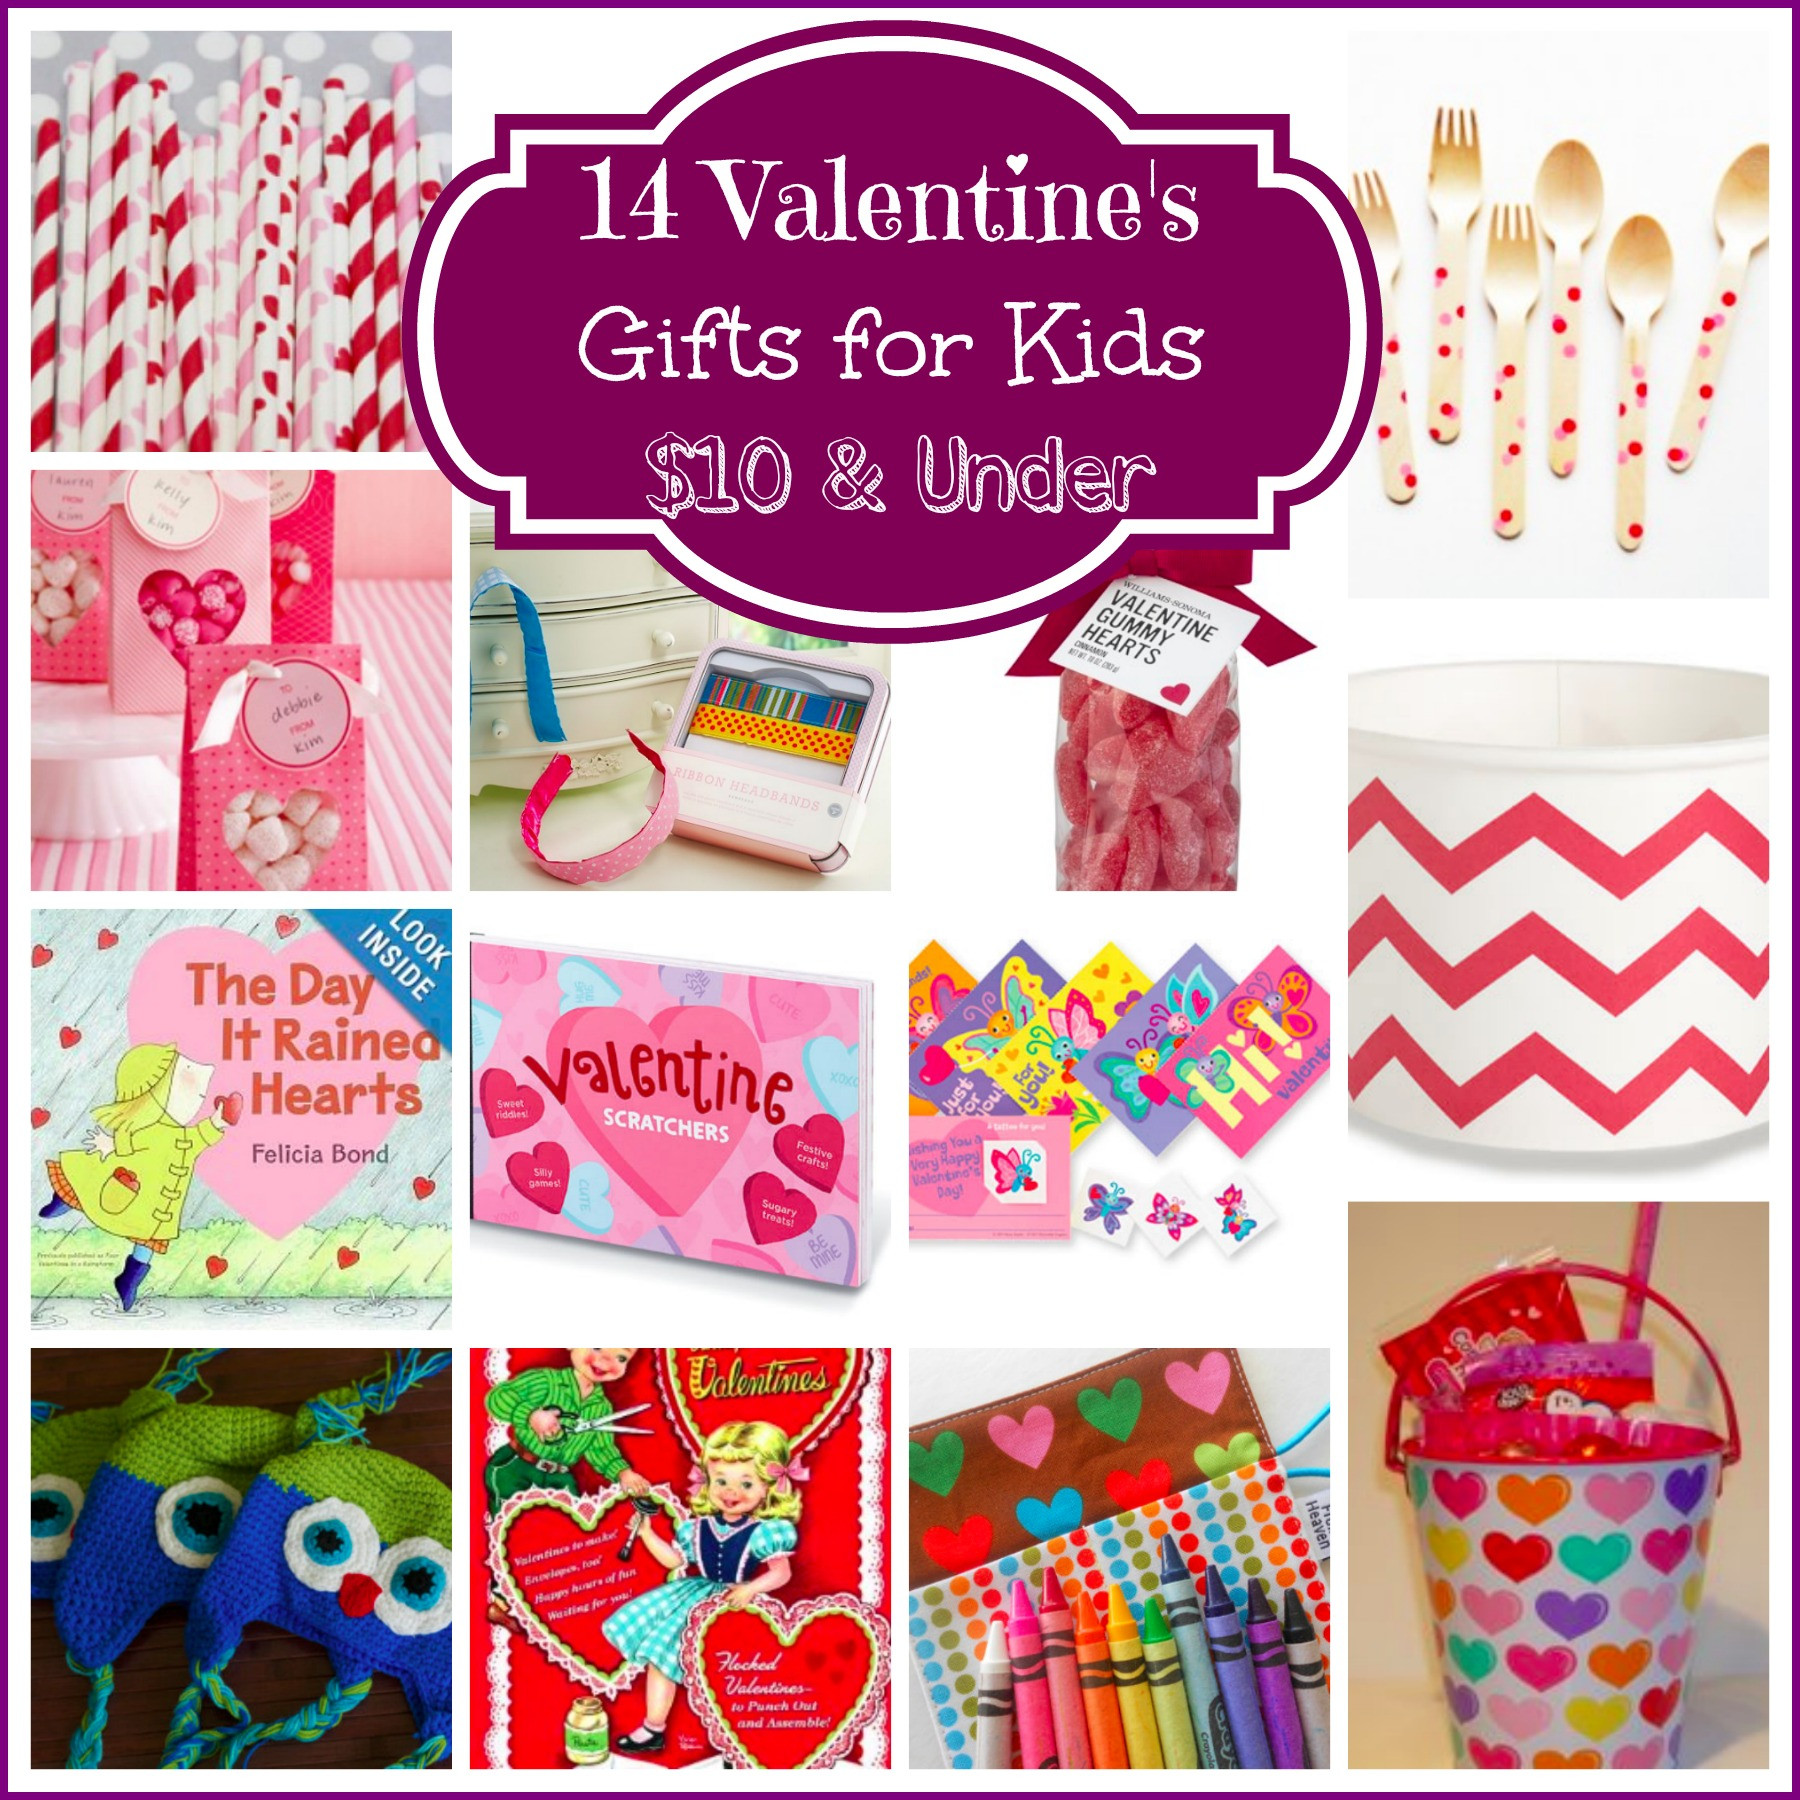 Valentines Day Gifts For Kids
 14 Valentine’s Day Gifts for Kids $10 & Under